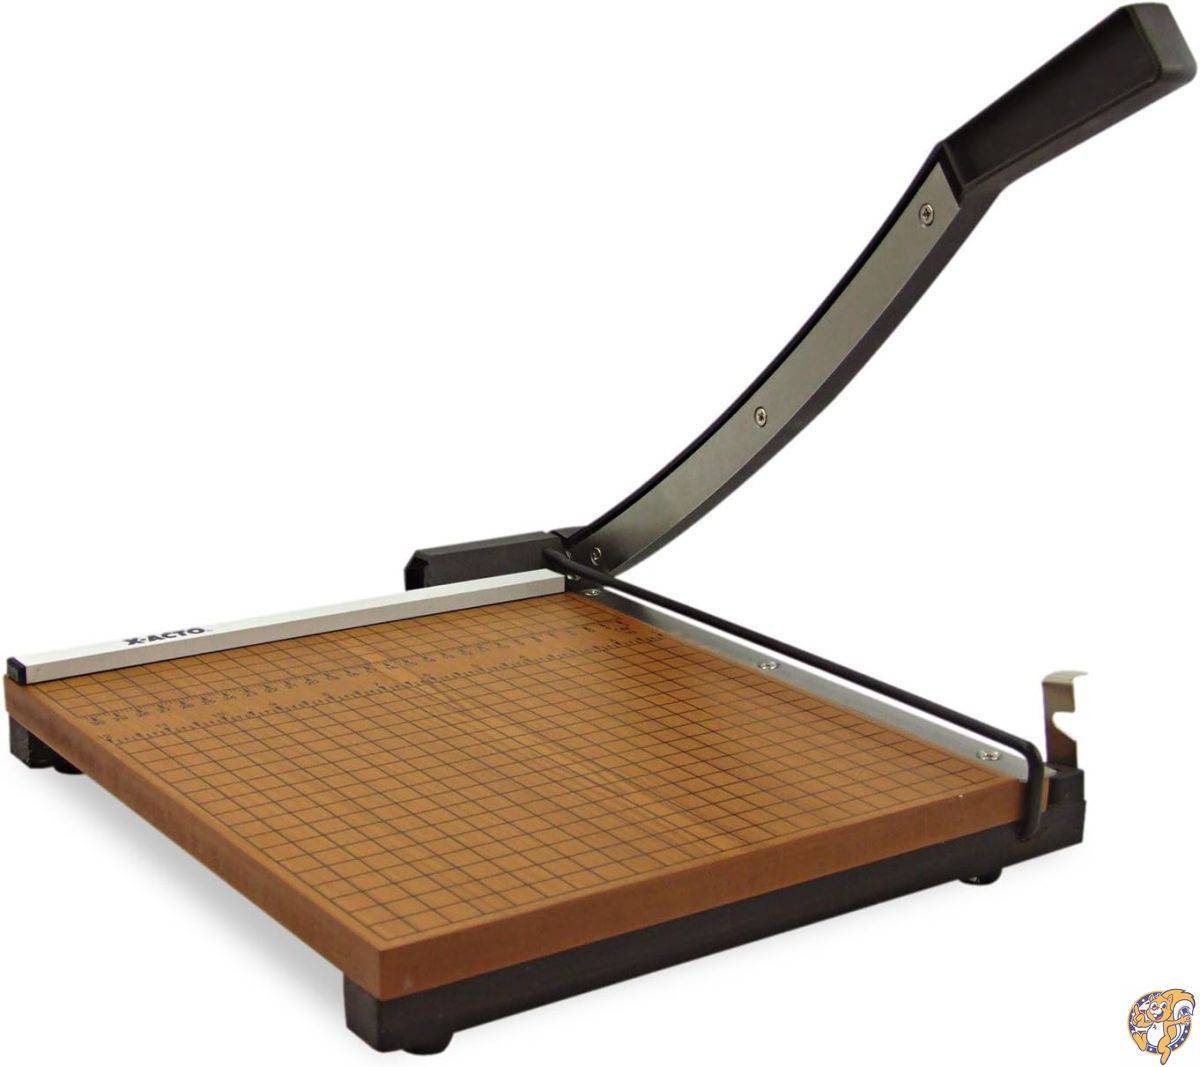 X-ACTO 15x15 Commercial Grade Square Guillotine Trimmer by X-Acto [並行輸入品]